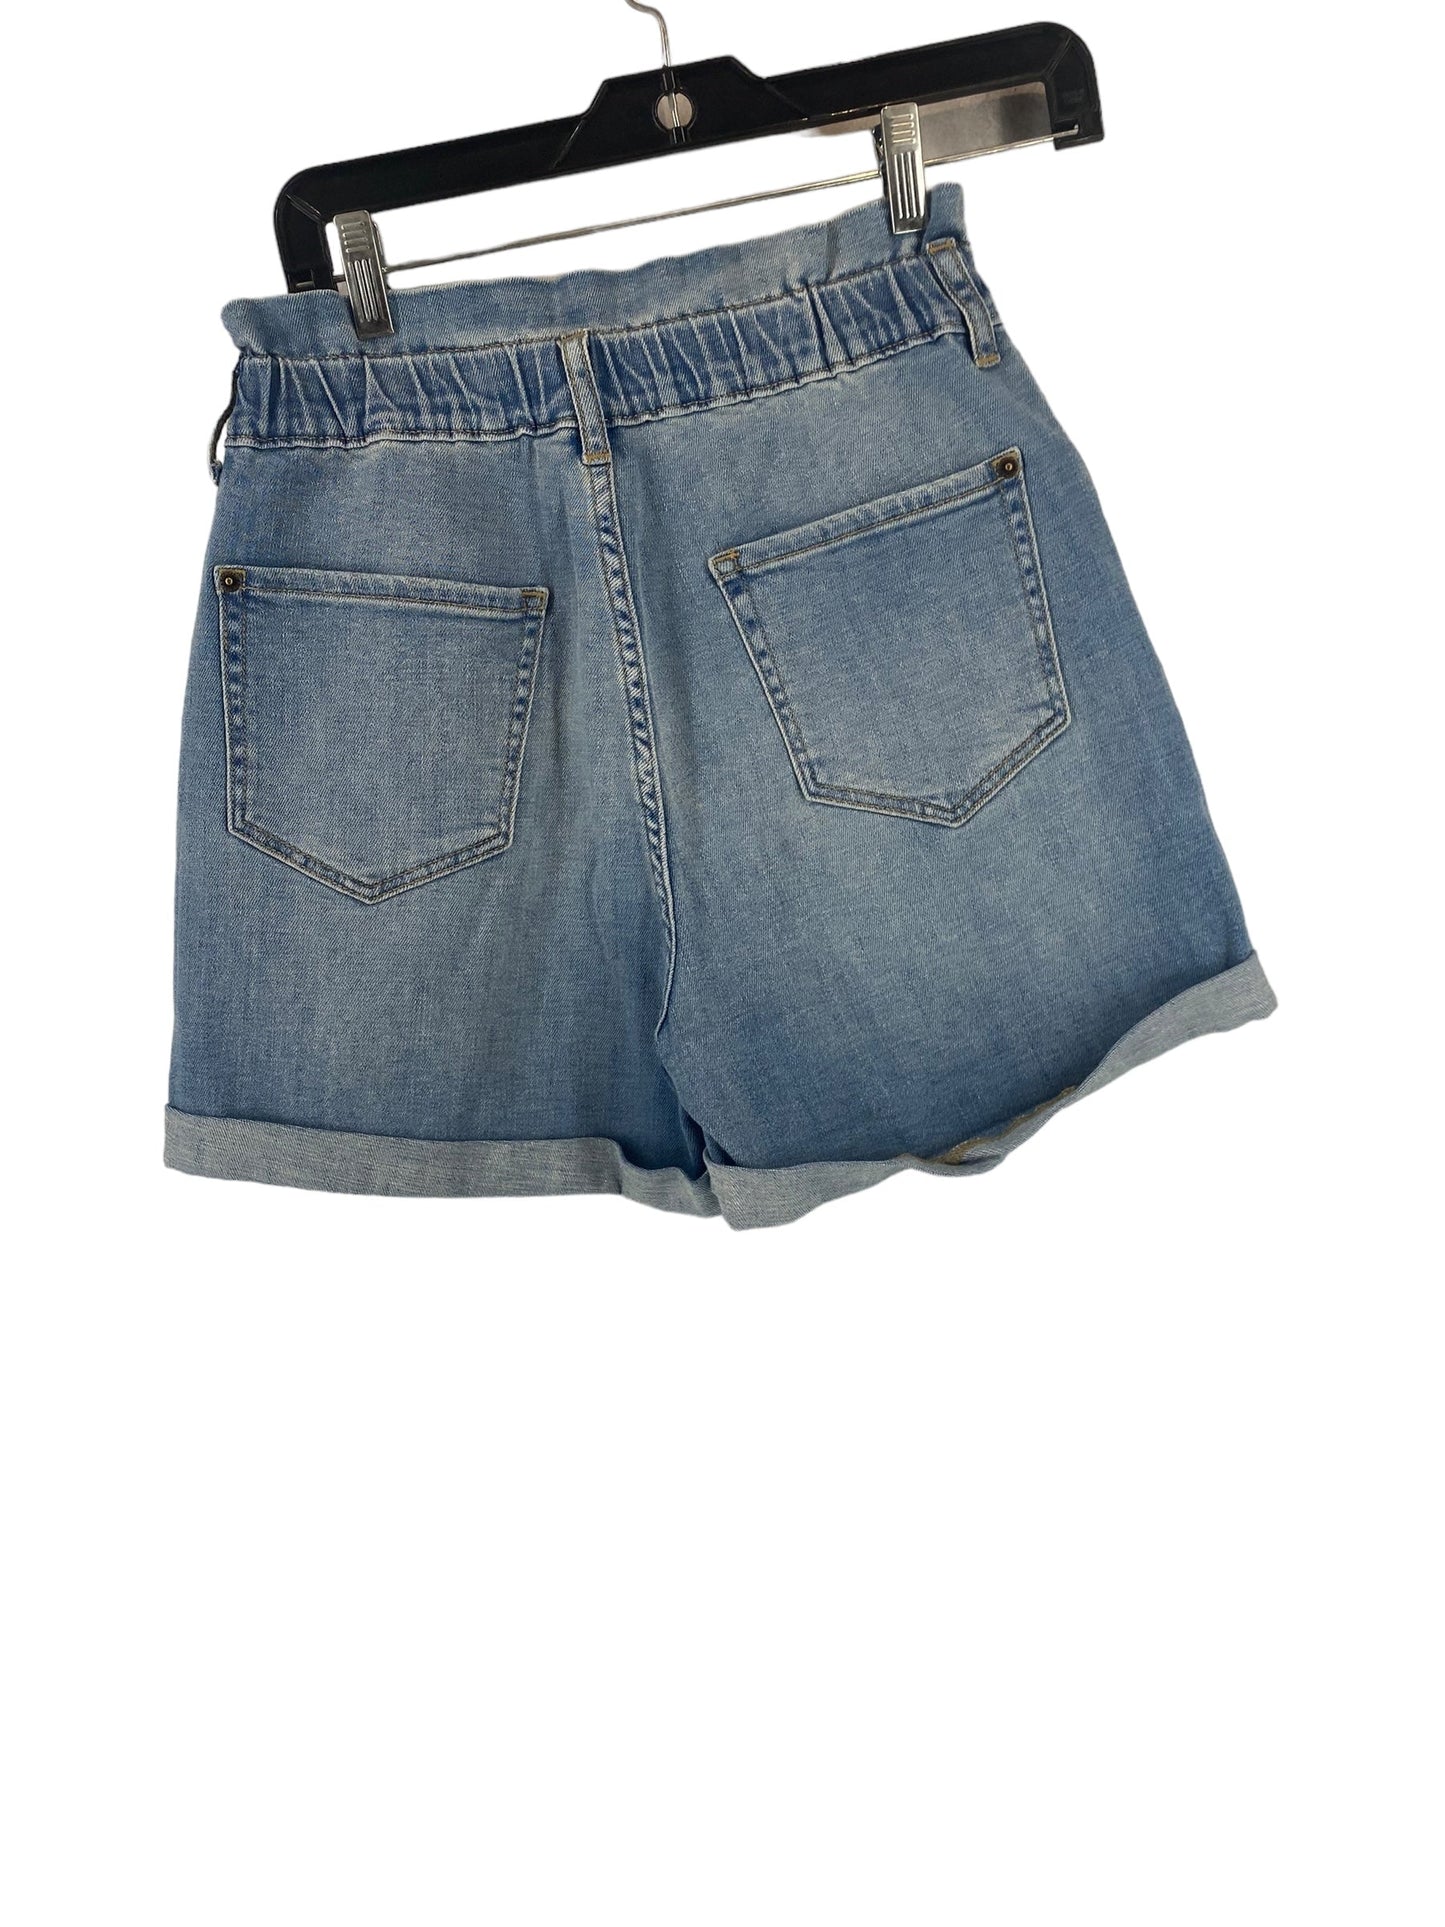 Blue Denim Shorts New York And Co, Size S